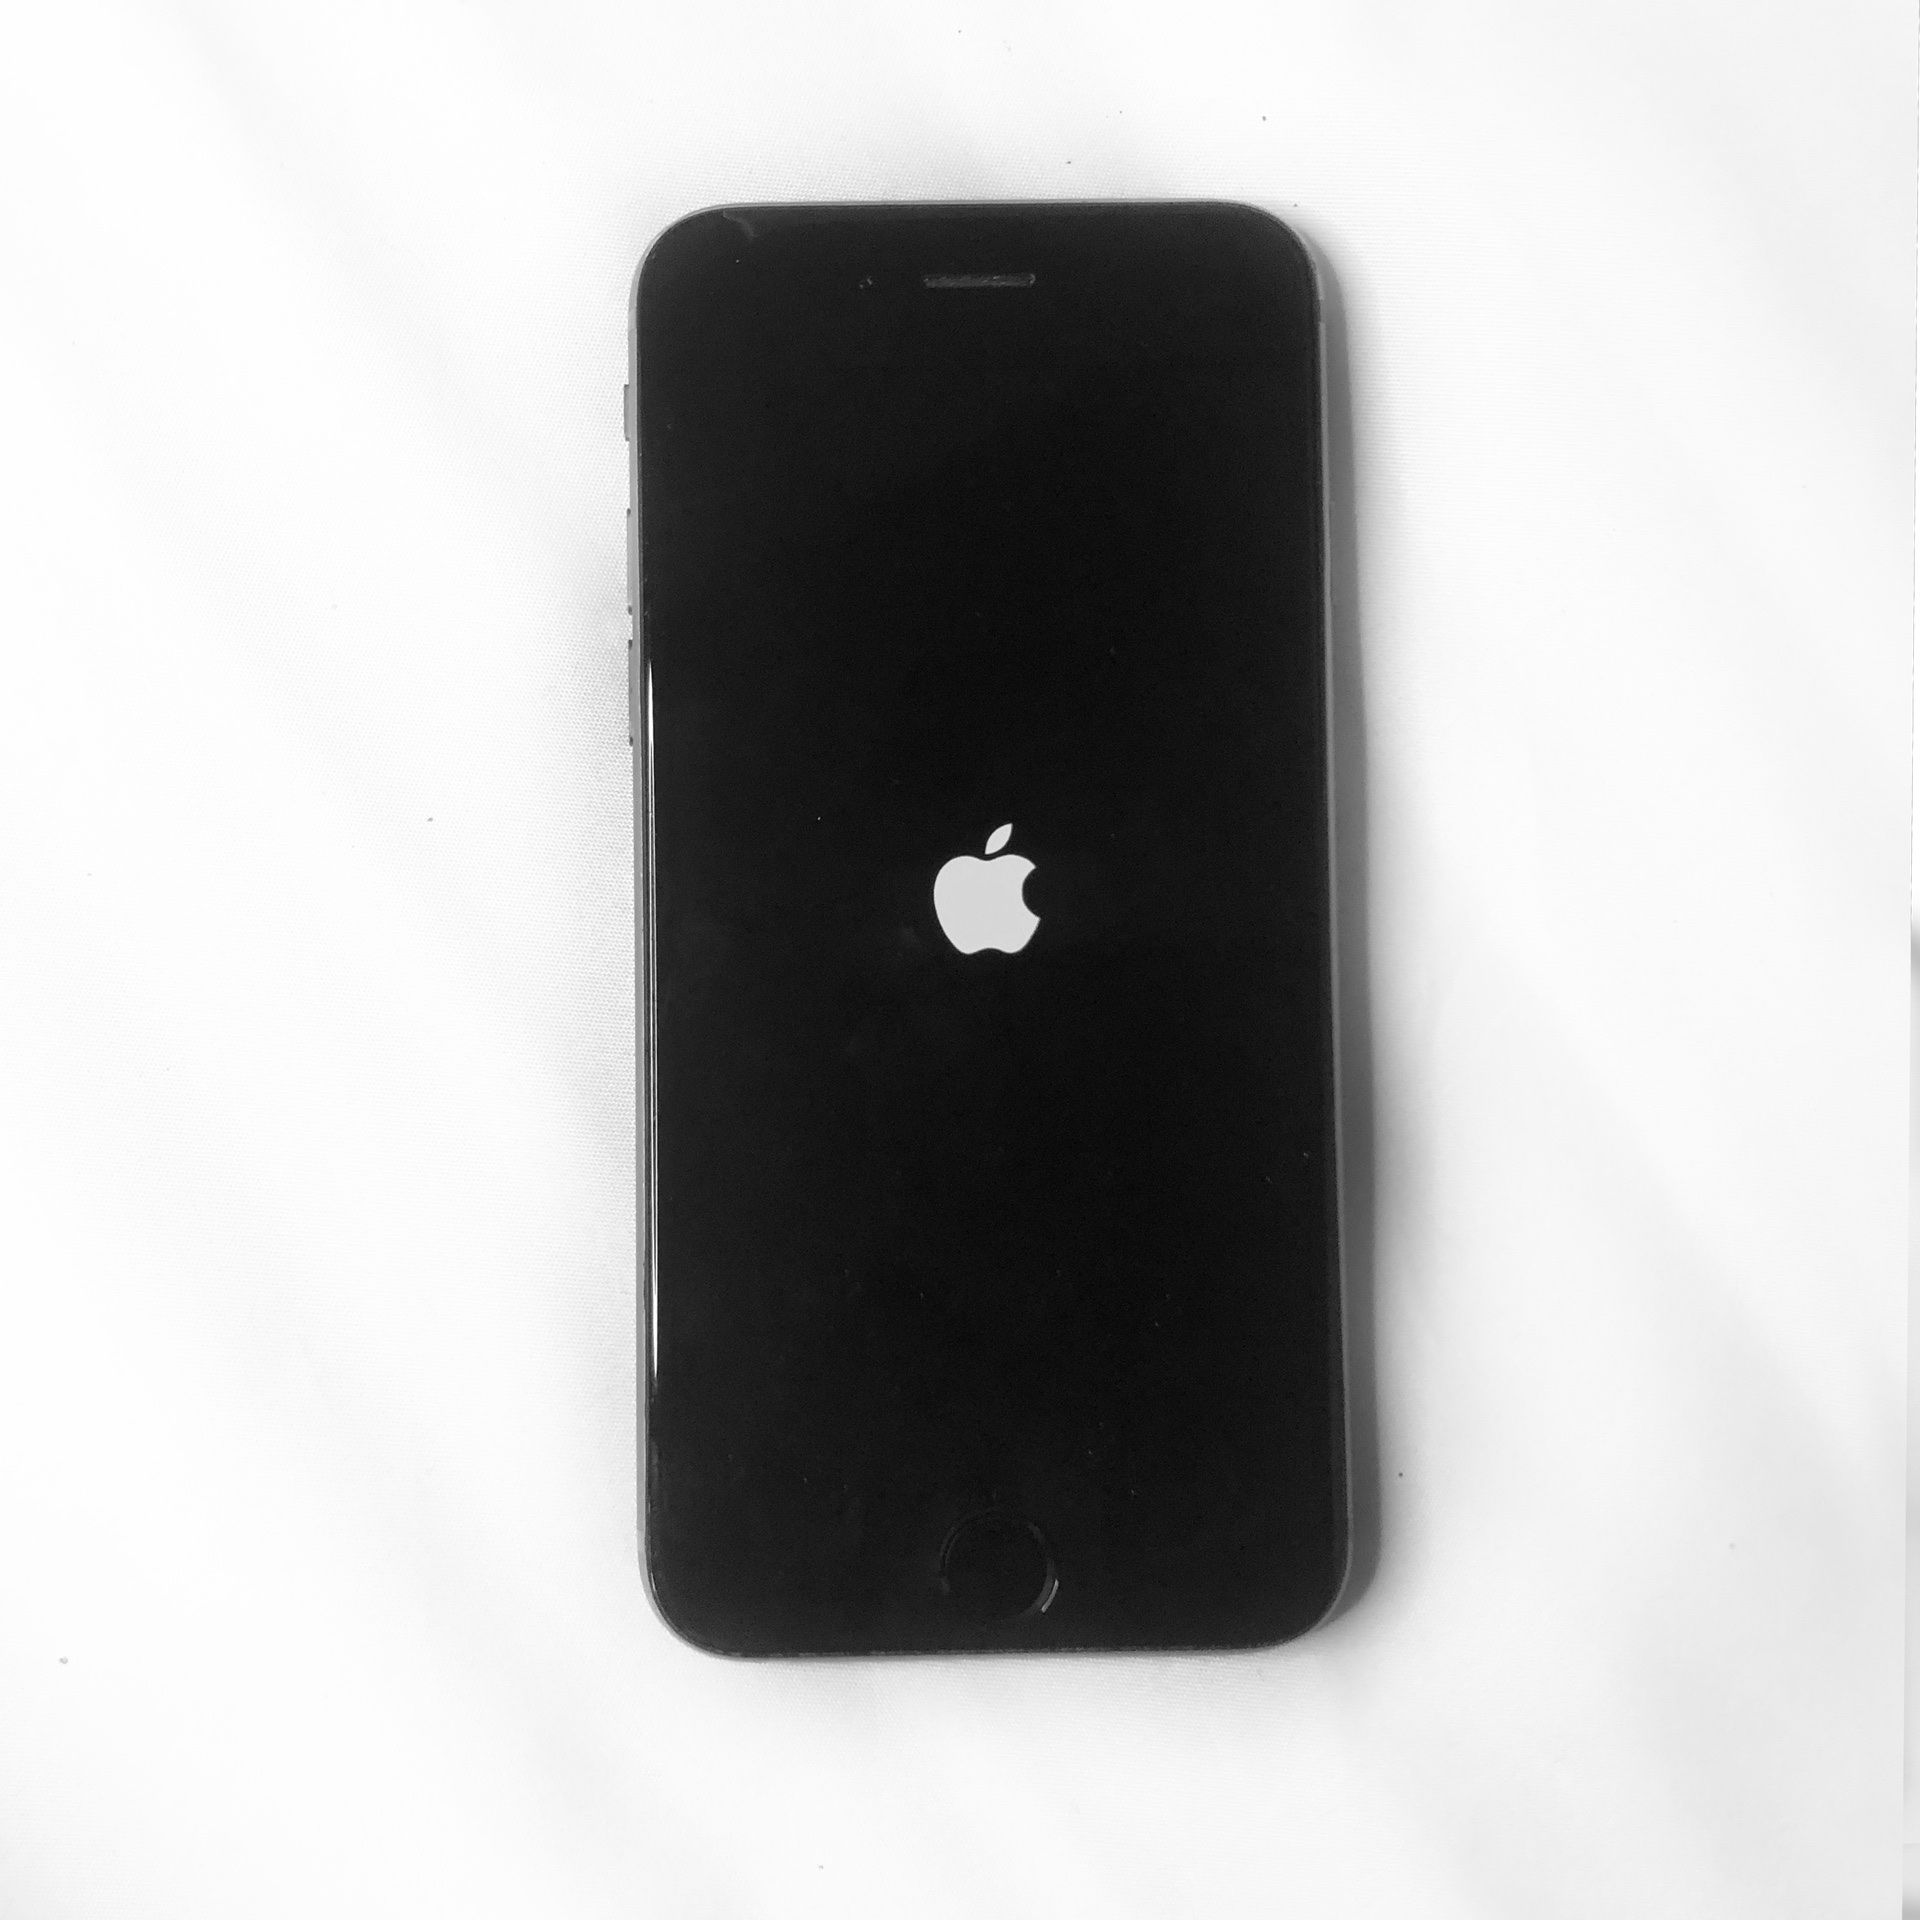 IPhone 6, 64GB with Free Accessories